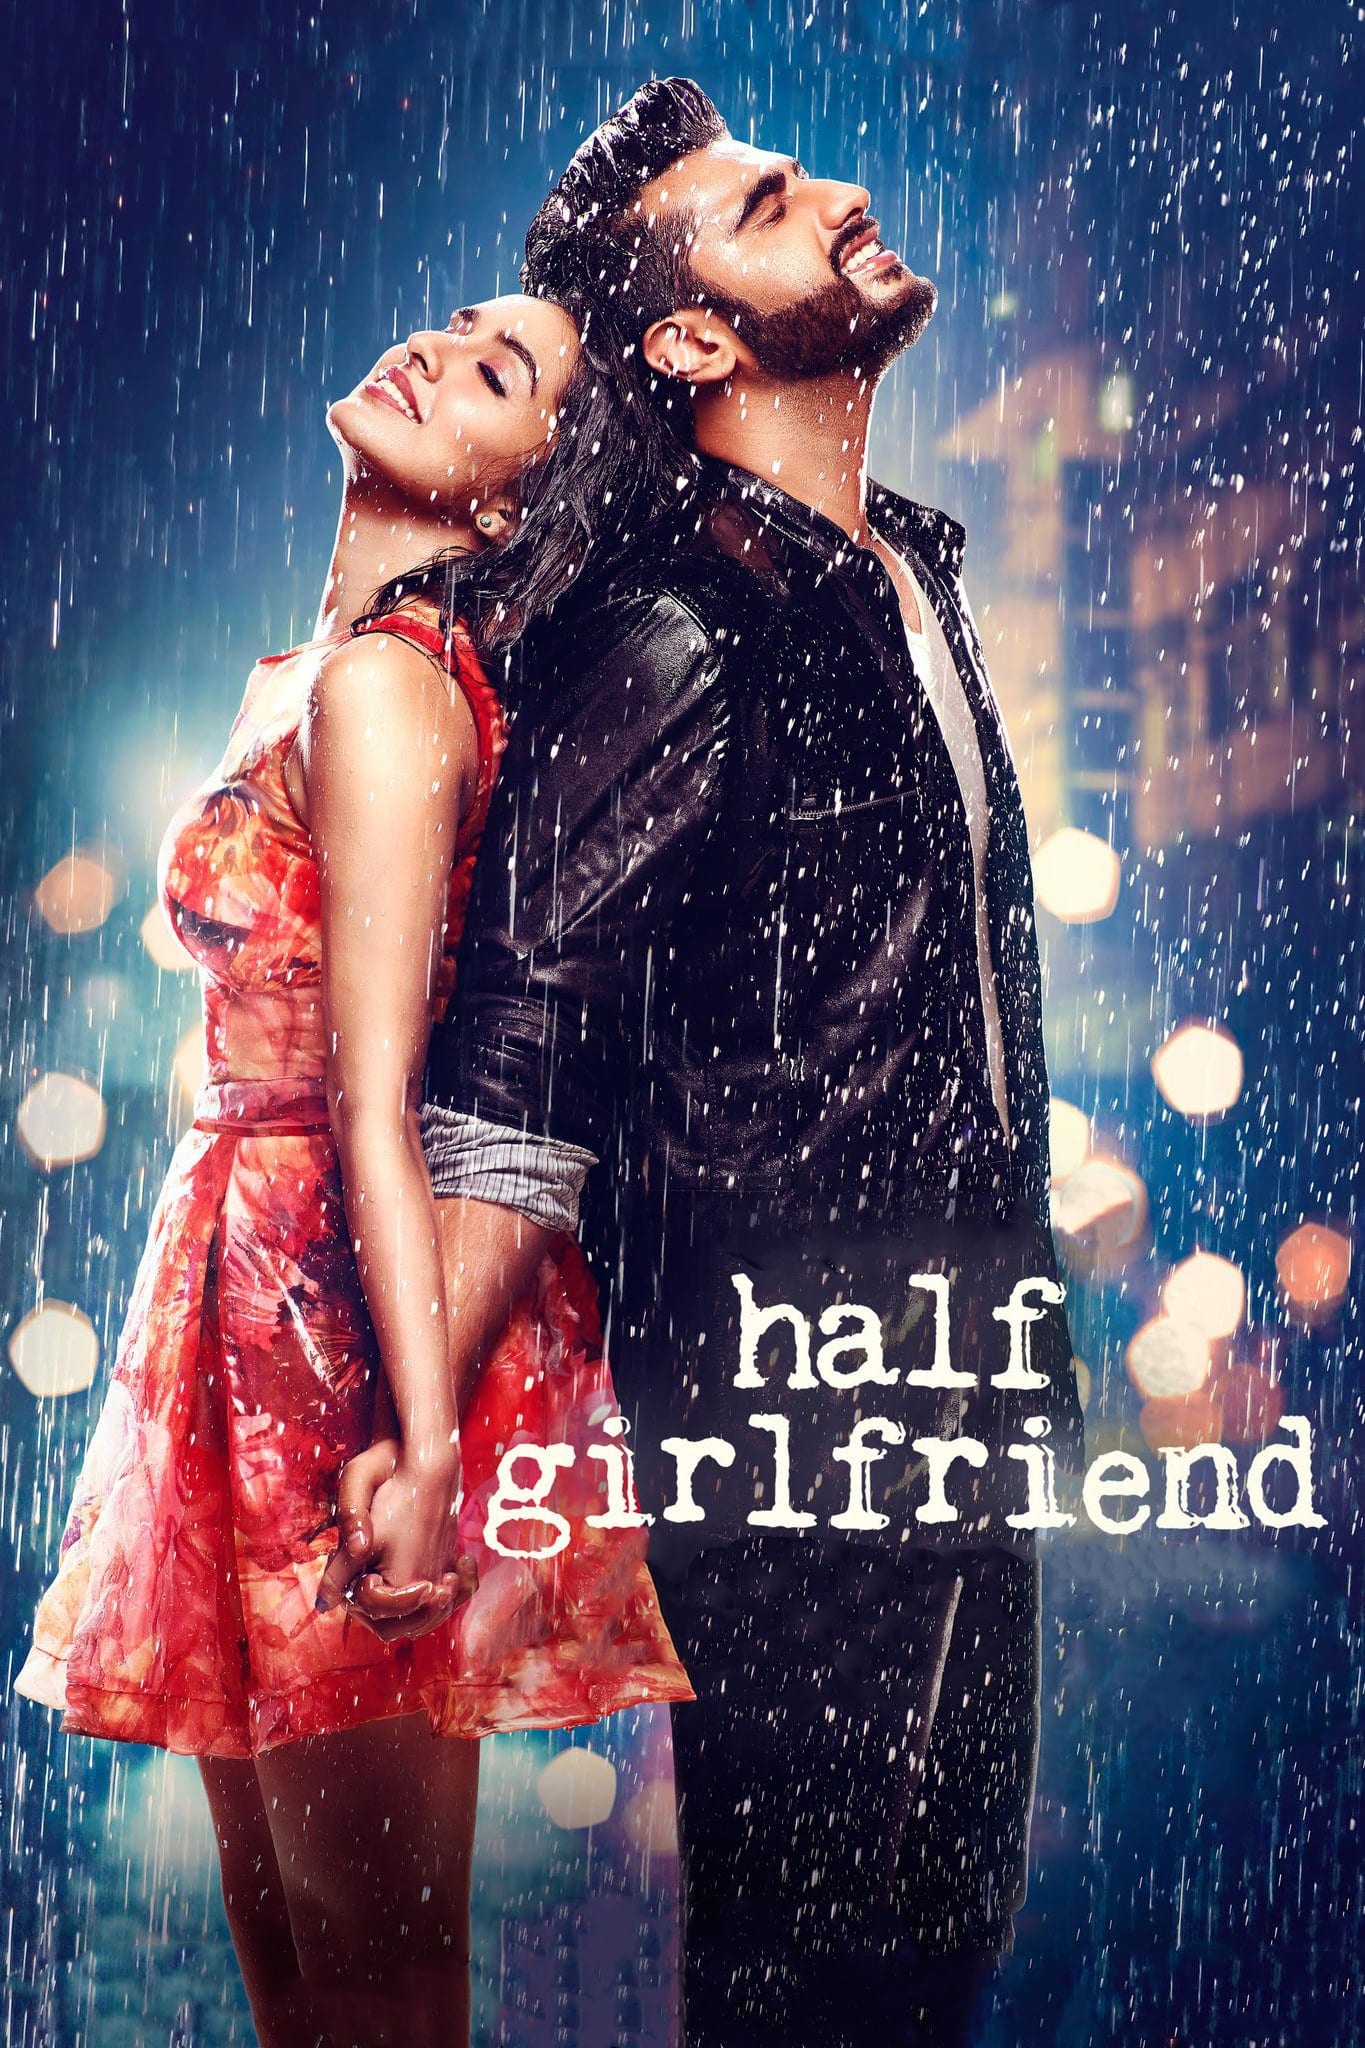 Poster for the movie "Half Girlfriend"